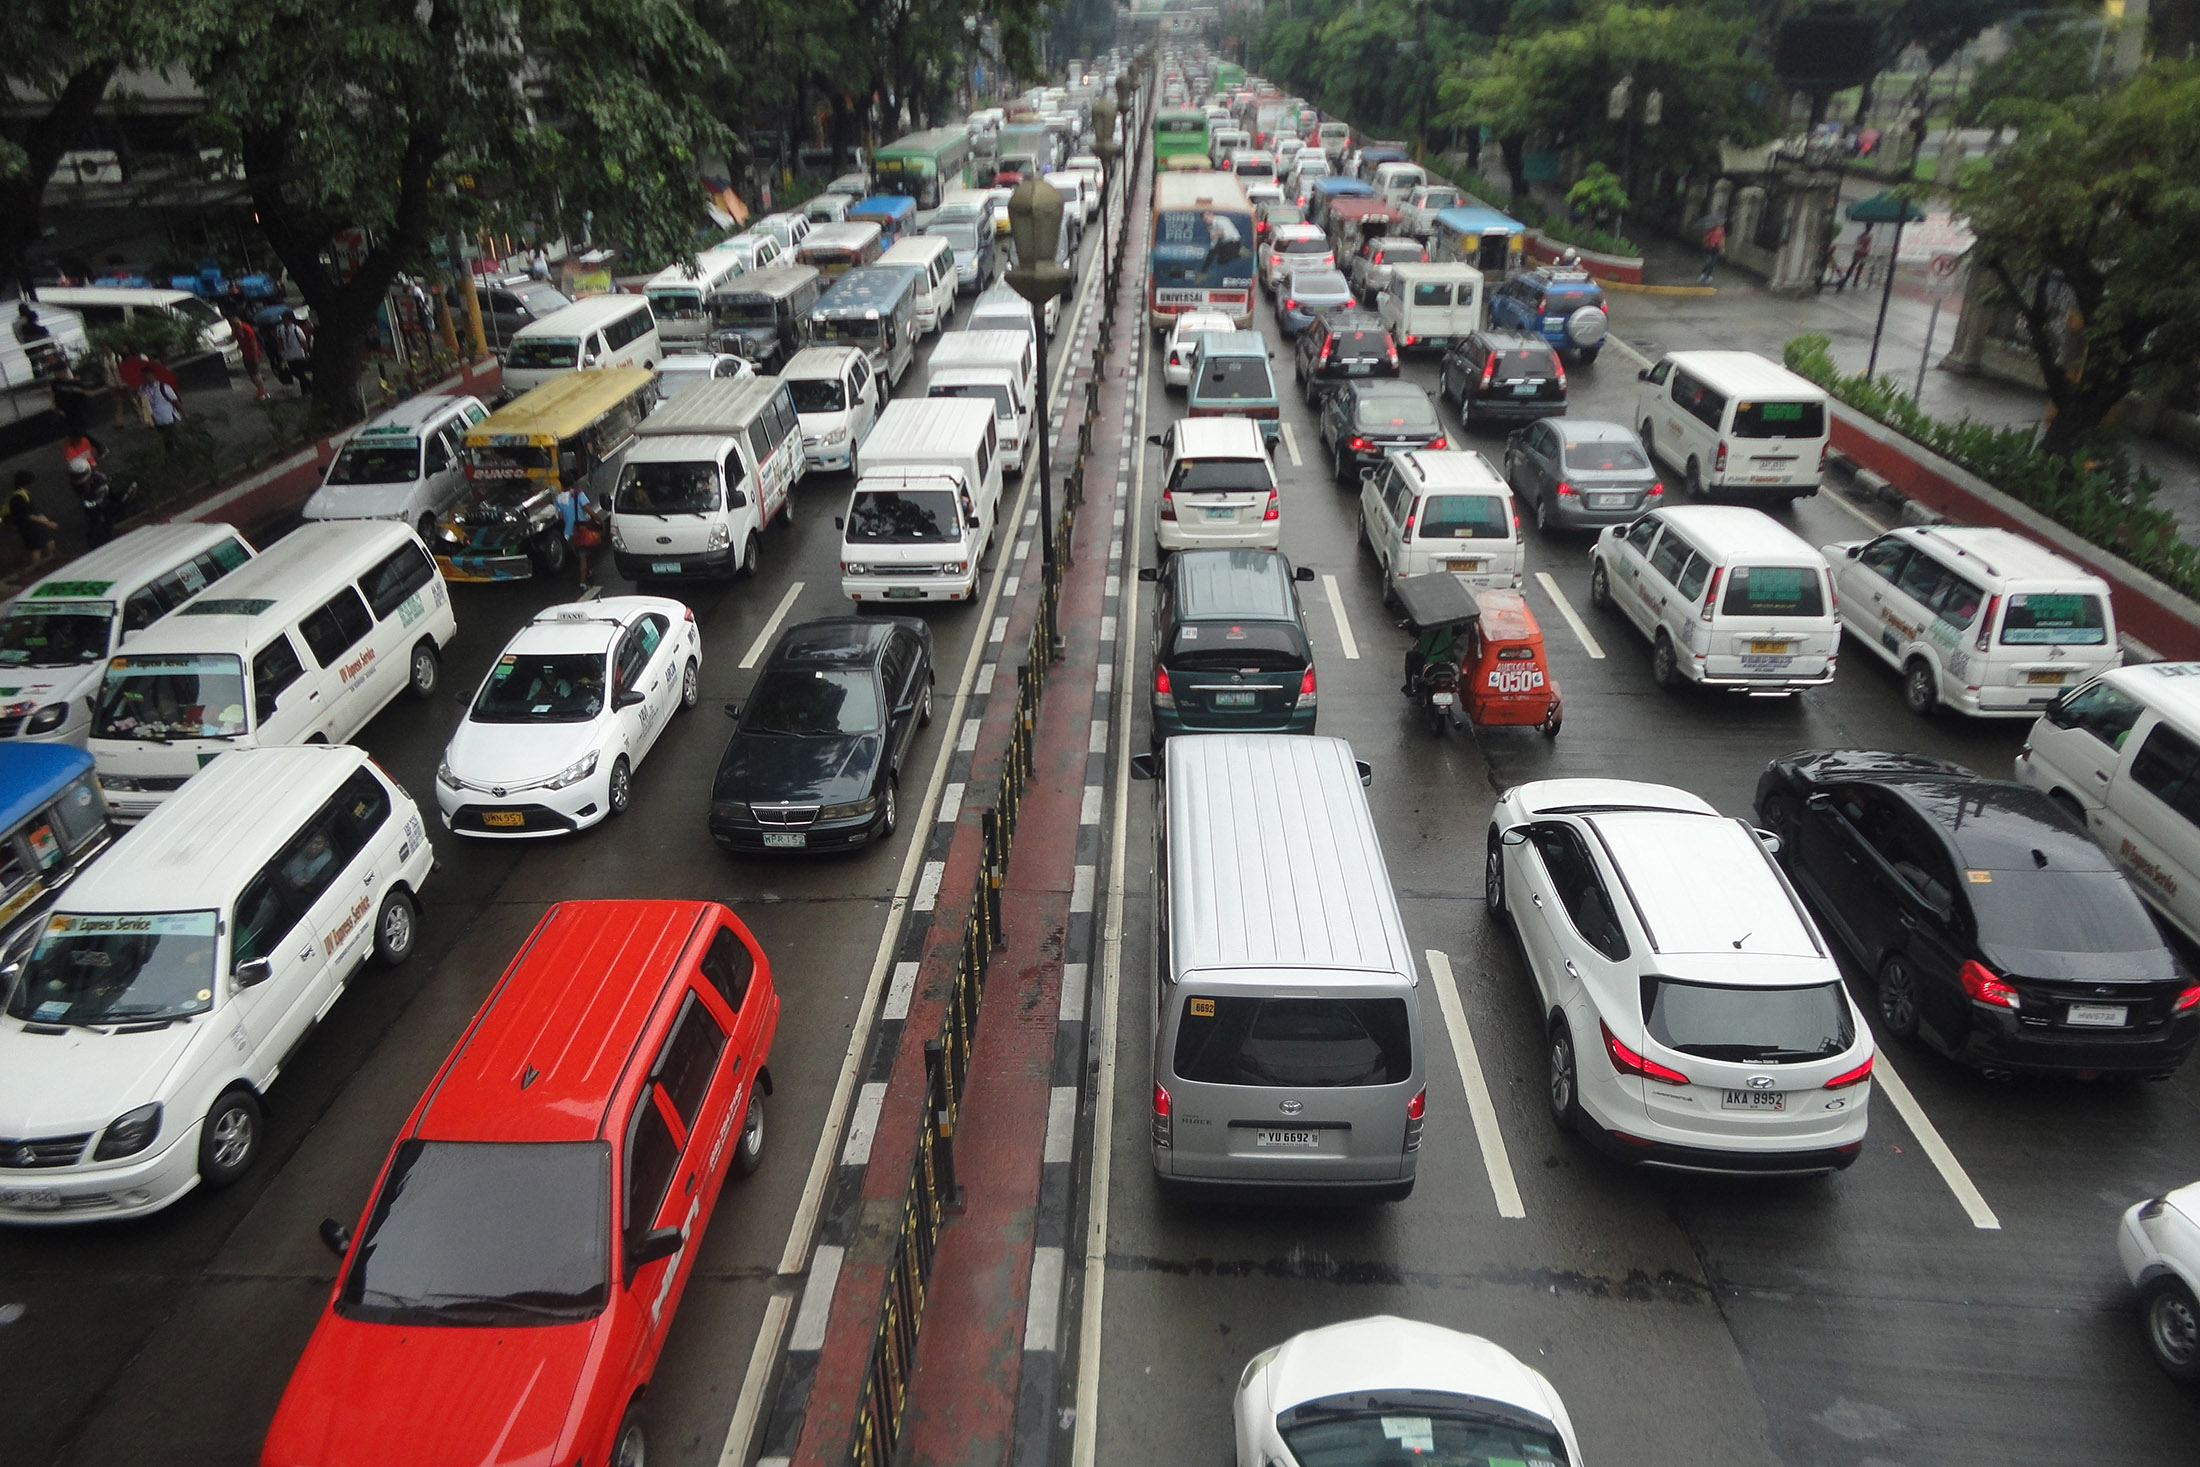 Vehicular traffic moves slowly in Manila, Philippines on Friday, November 4, 2016. According to the World Health Organization Global Platform on Air Quality &amp; Health, the Philippines' annual pollution level averages to 22 micrograms of particles per cubic meter of air (µg/m3), 2.2 times higher than the WHO guideline of 10 µg/m3. The World Health Organization, in collaboration with the Climate and Clean Air Coalition and the Government of Norway, launched the BreathLife campaign which aims to to raise awareness about the health risks of short-lived climate pollutants, which contribute significantly to global warming and air pollution.
